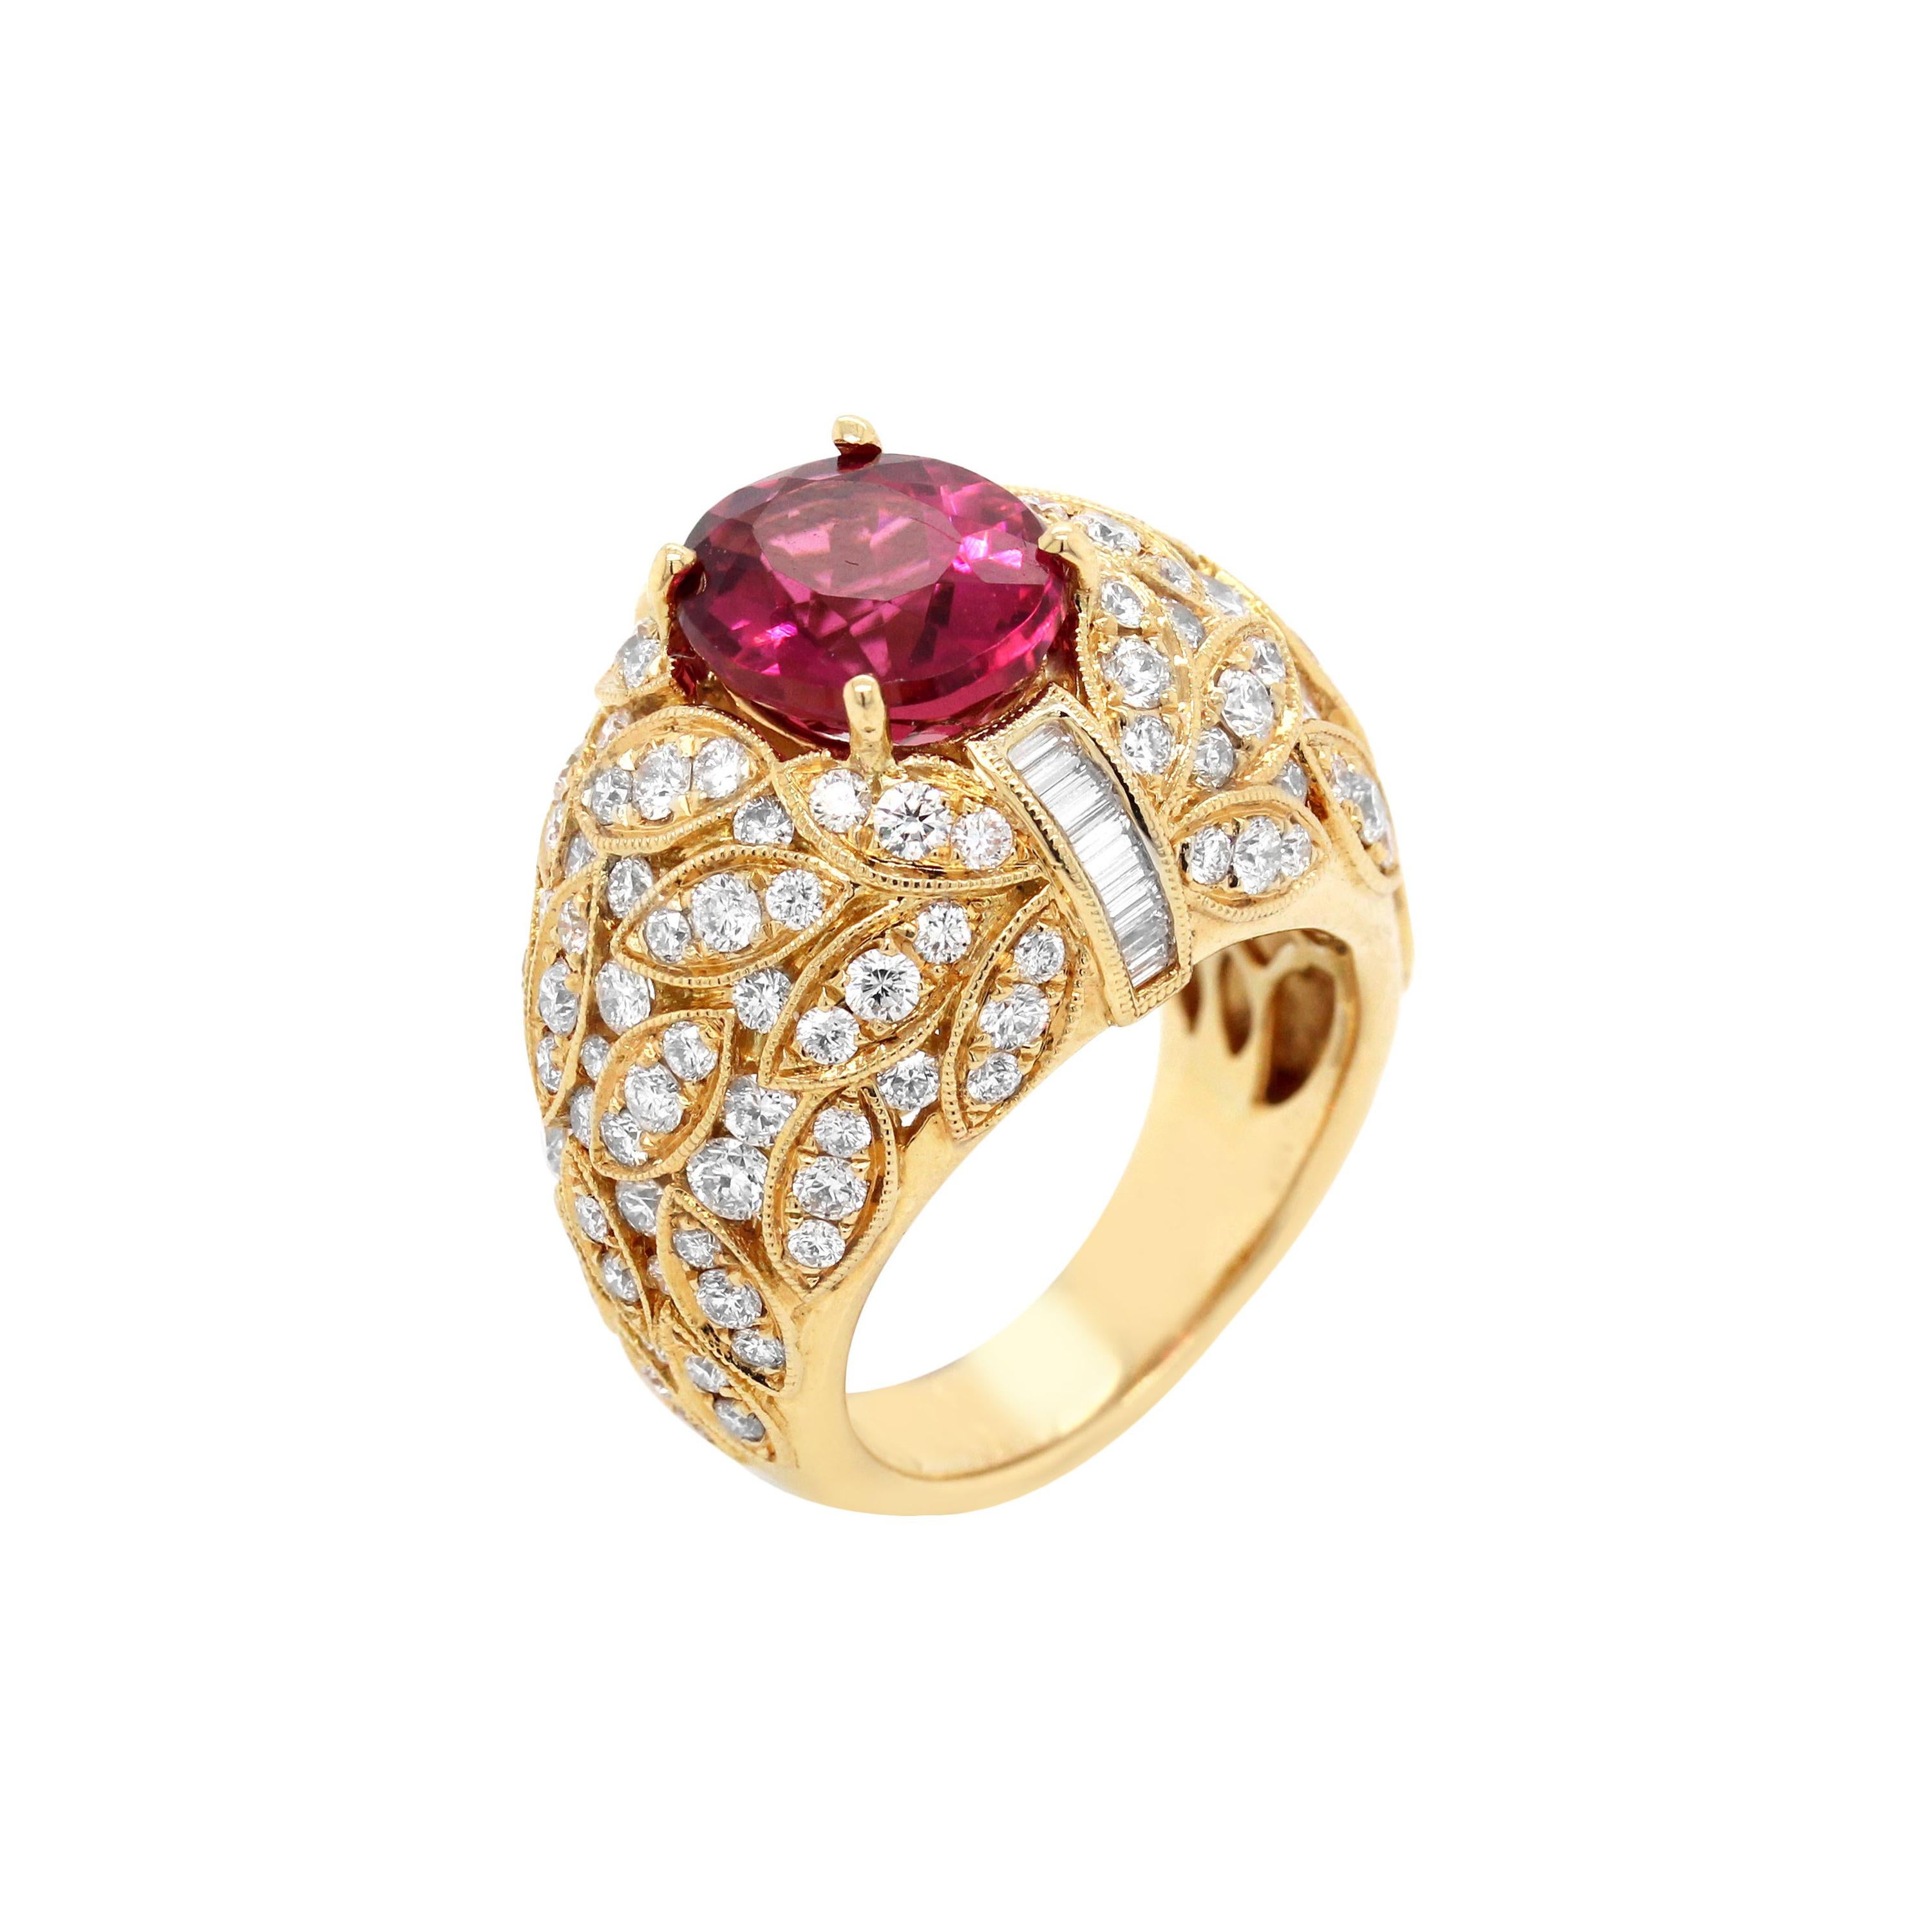 Yellow Gold and Diamond Ring with Rubellite Tourmaline Center